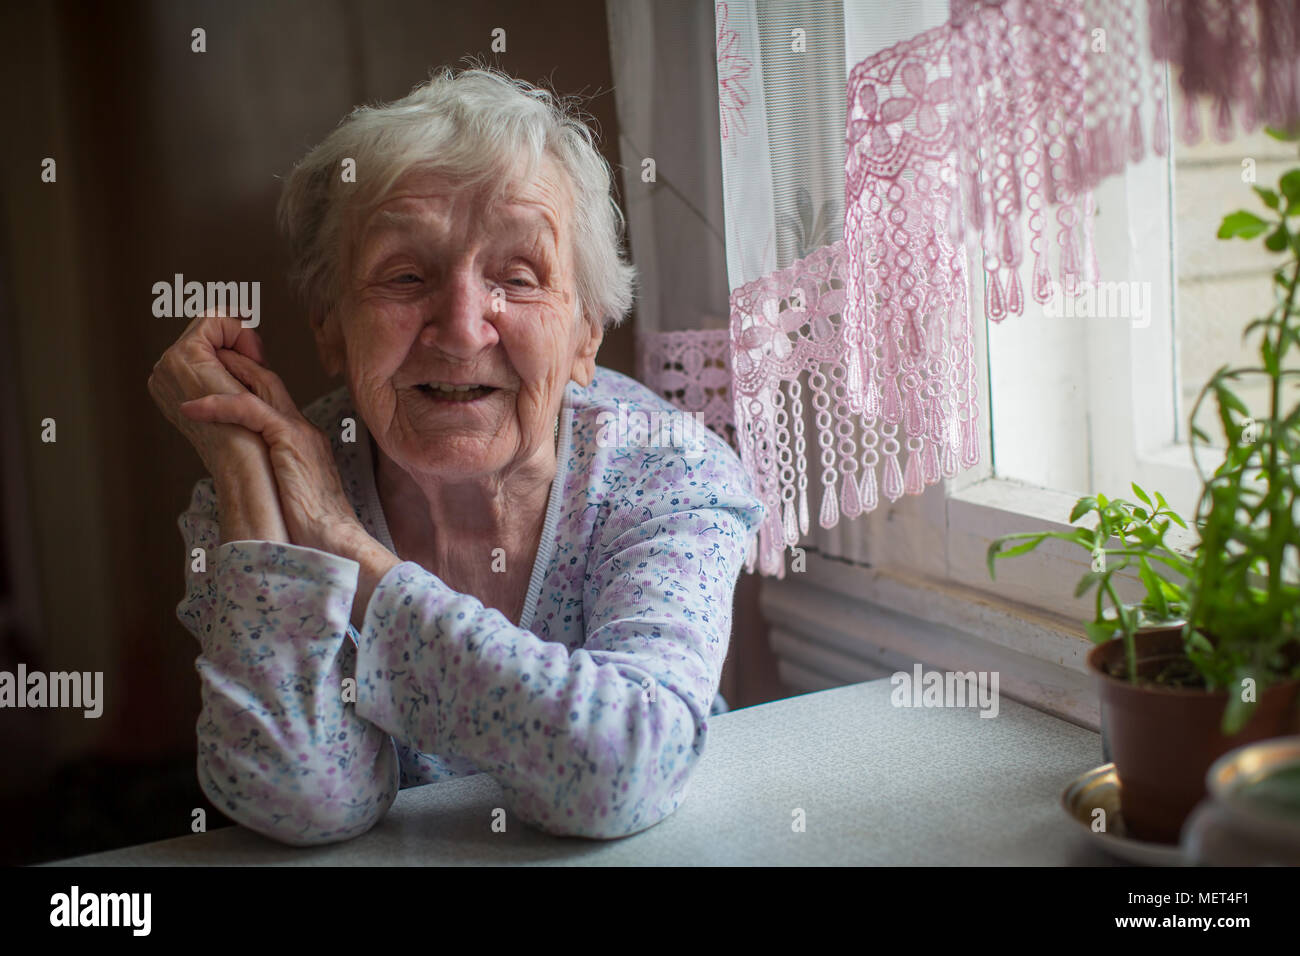 Portrait of an elderly positive woman 75-80 years old. Stock Photo